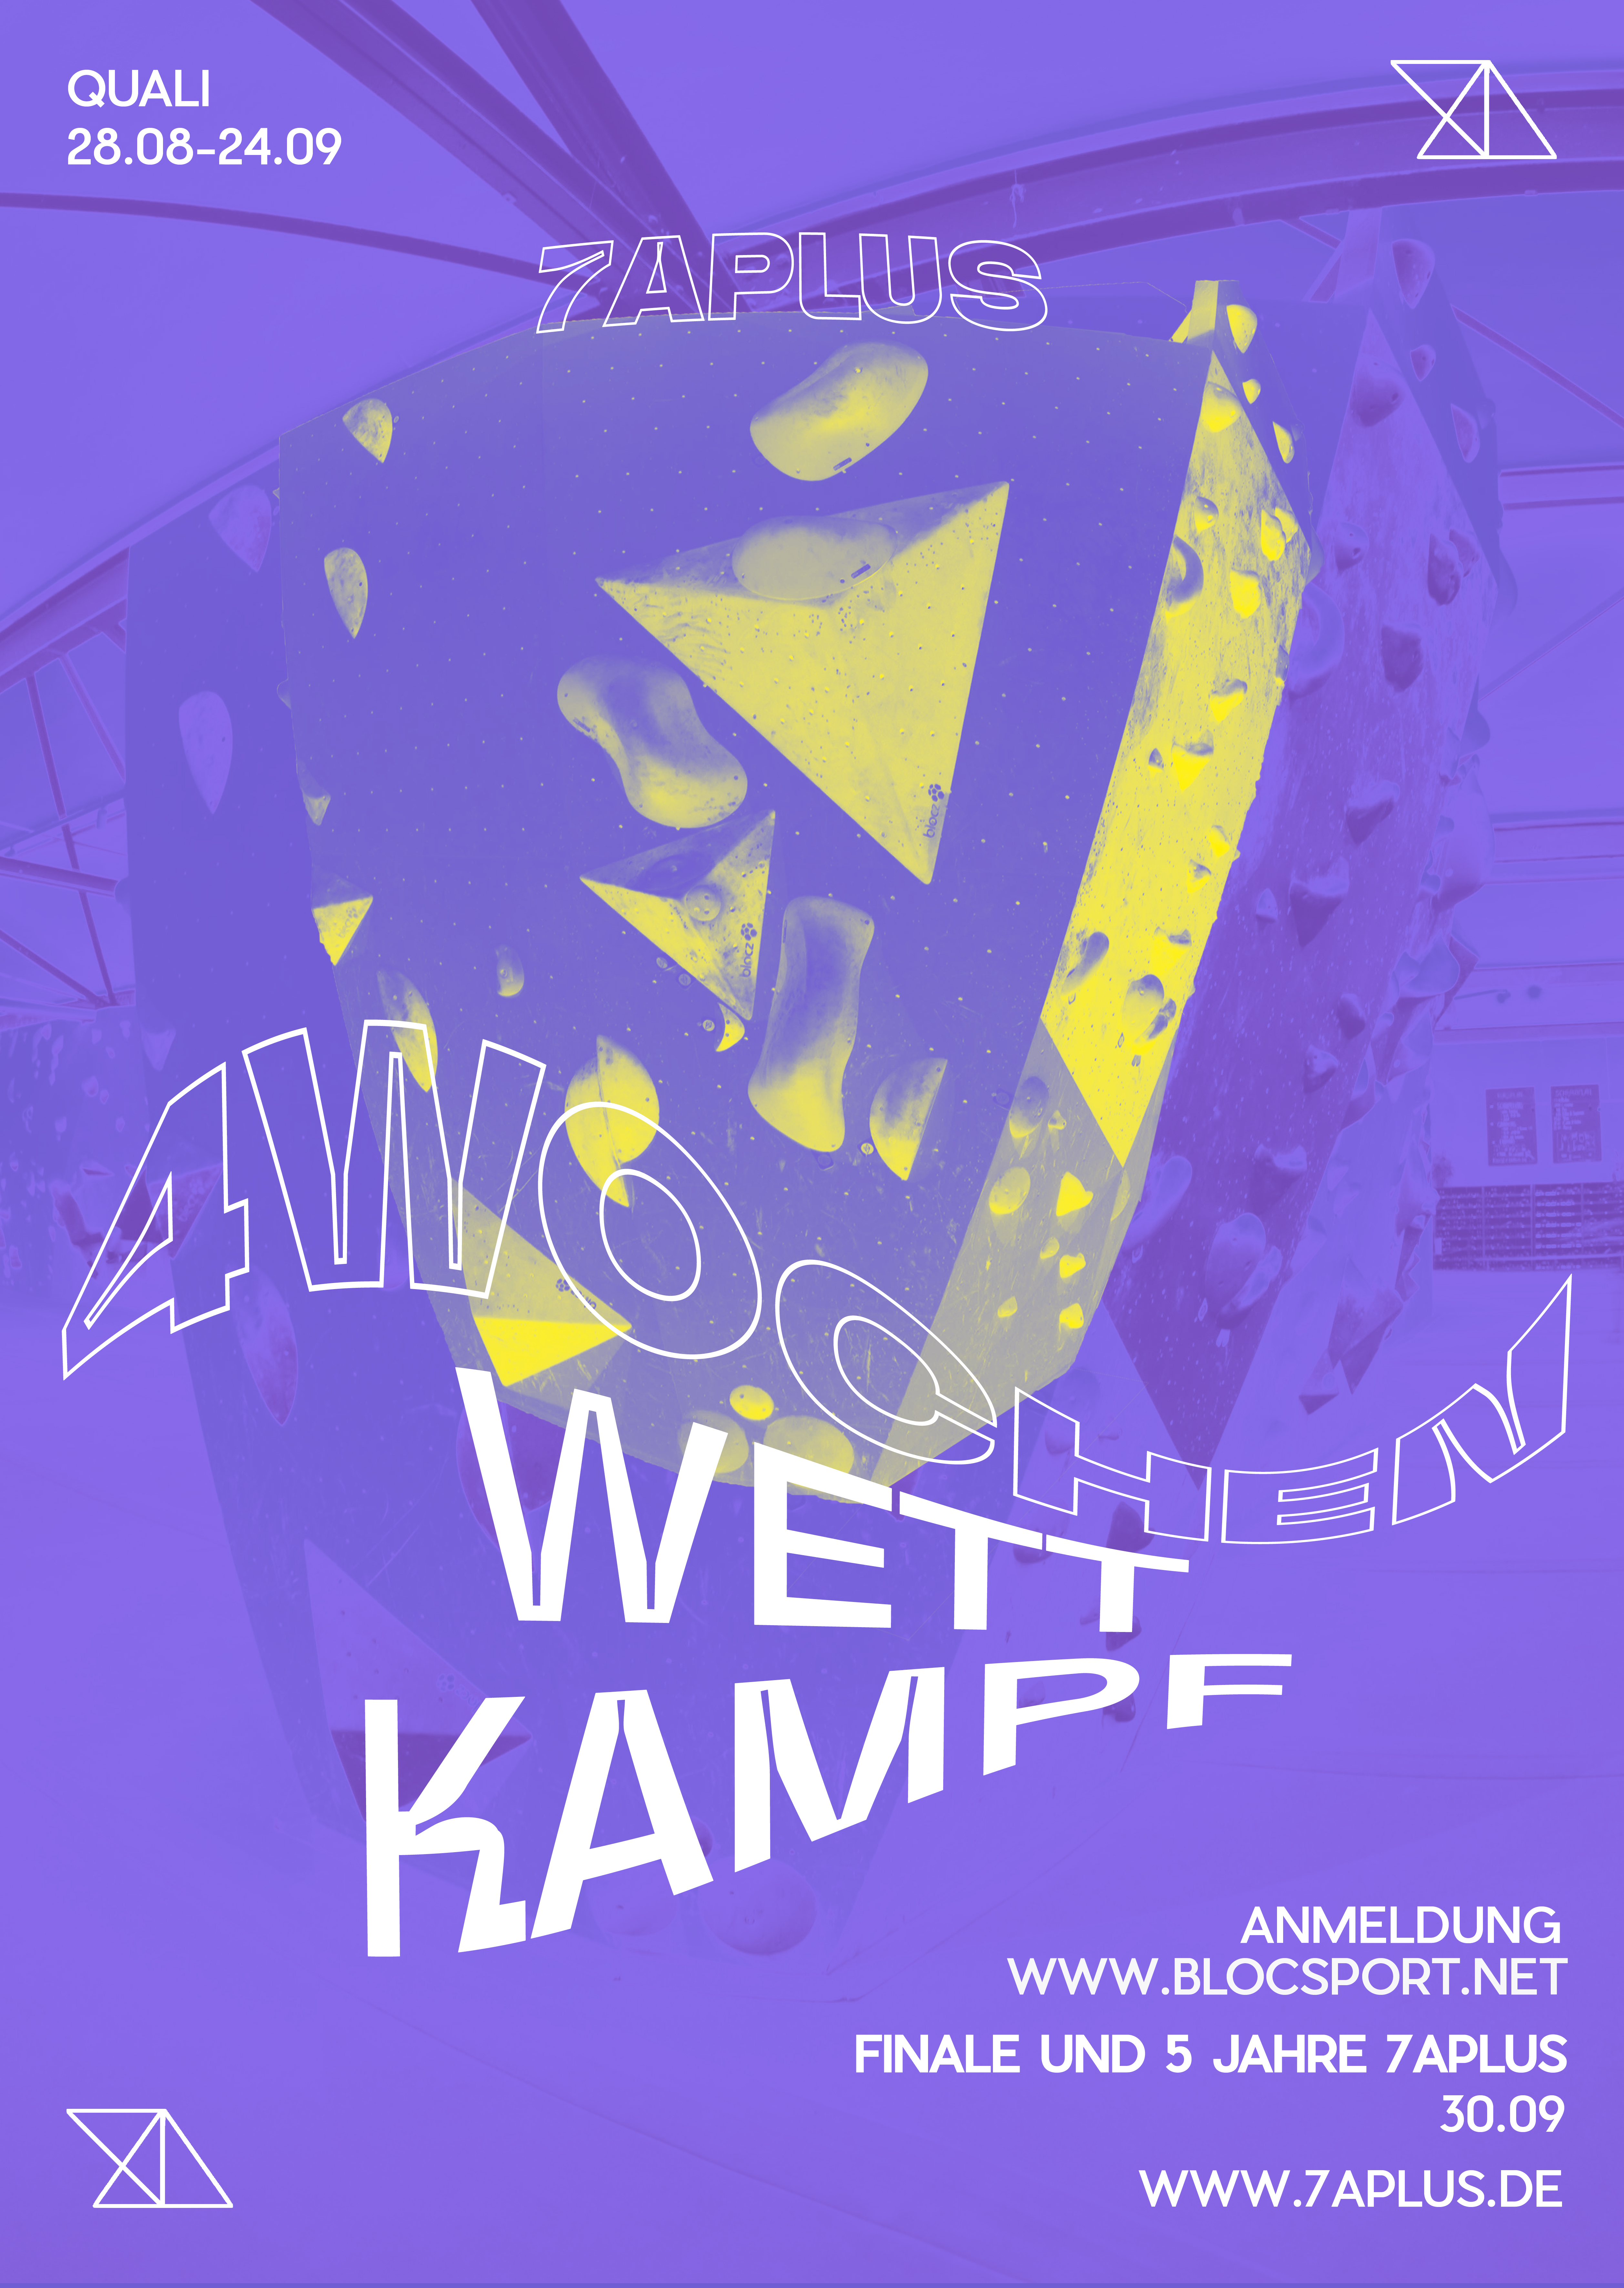 Poster for 4 WOCHEN WETTKAMPF